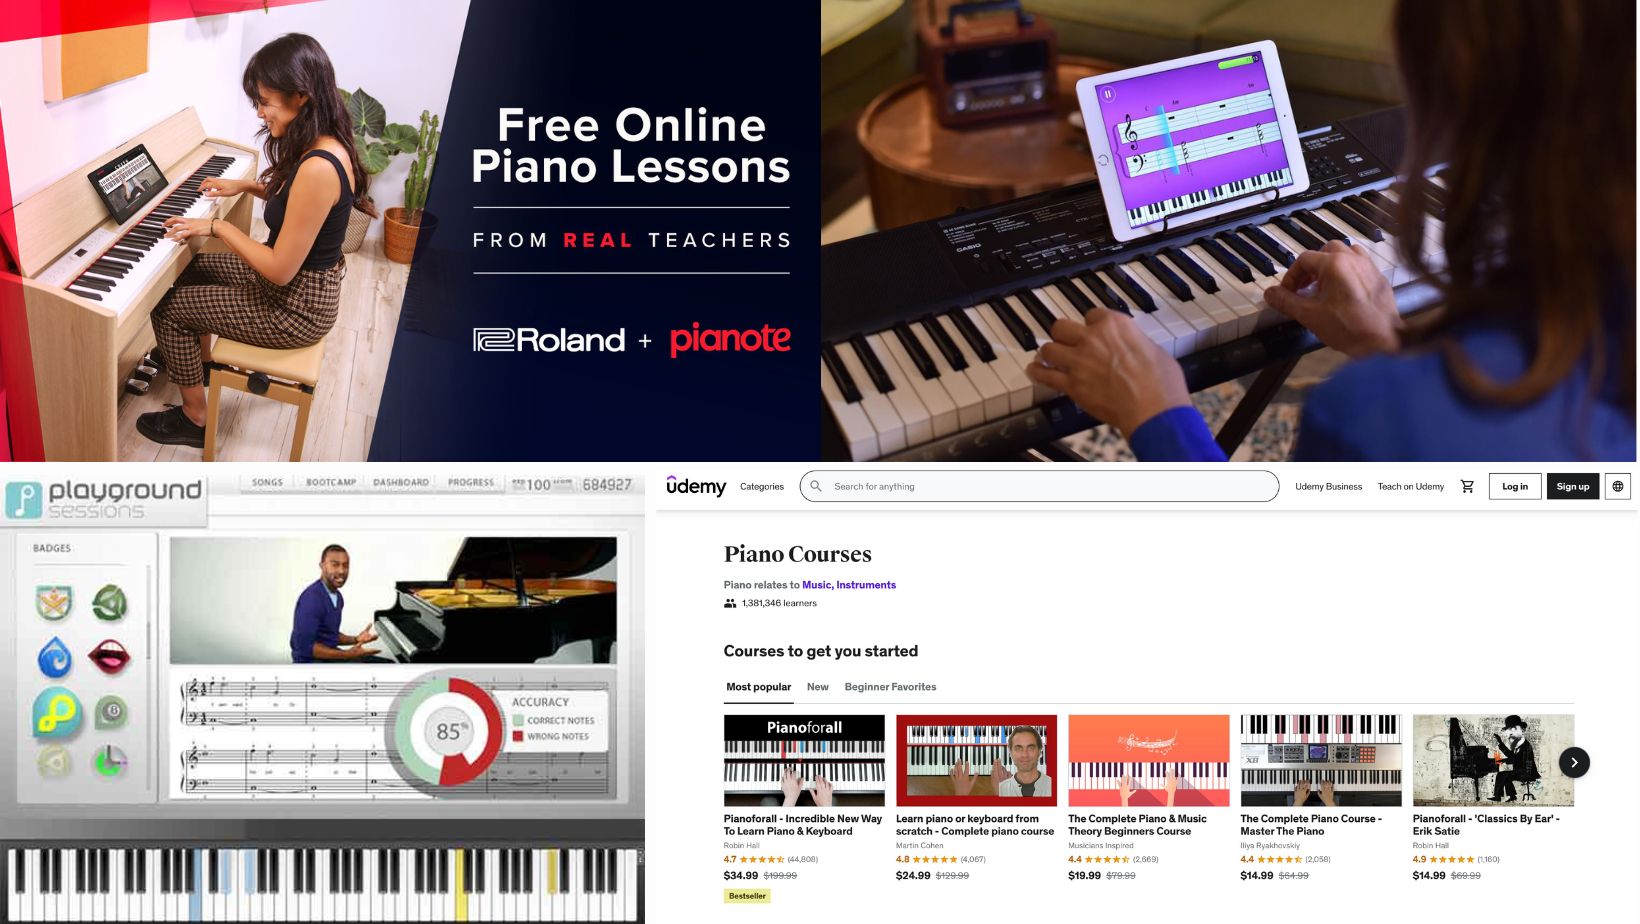 Apps for Learning Piano ie. Pianote, Simply Piano, Playground Sessions, Udemy Courses